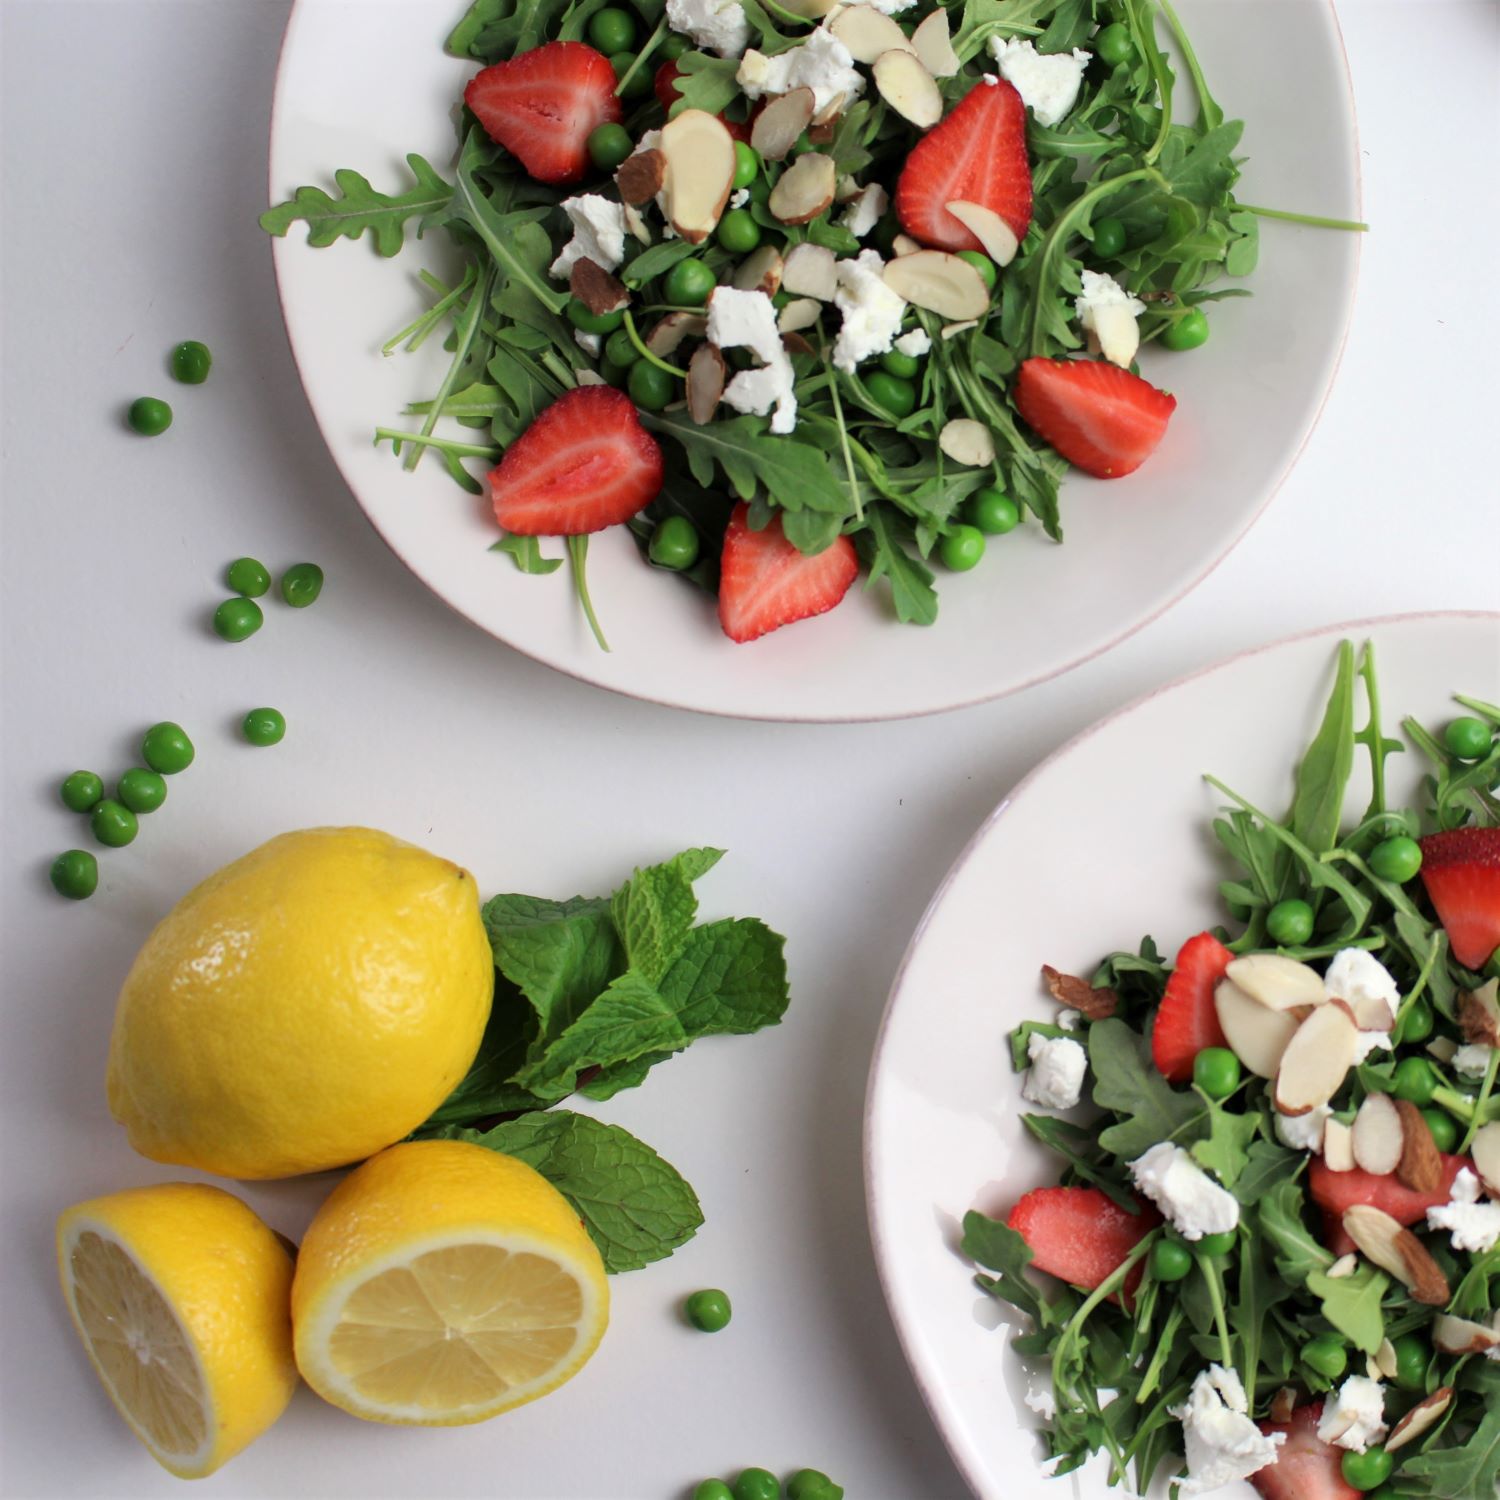 Two plates of easy peasy arugula salad with a lmeon on the side.